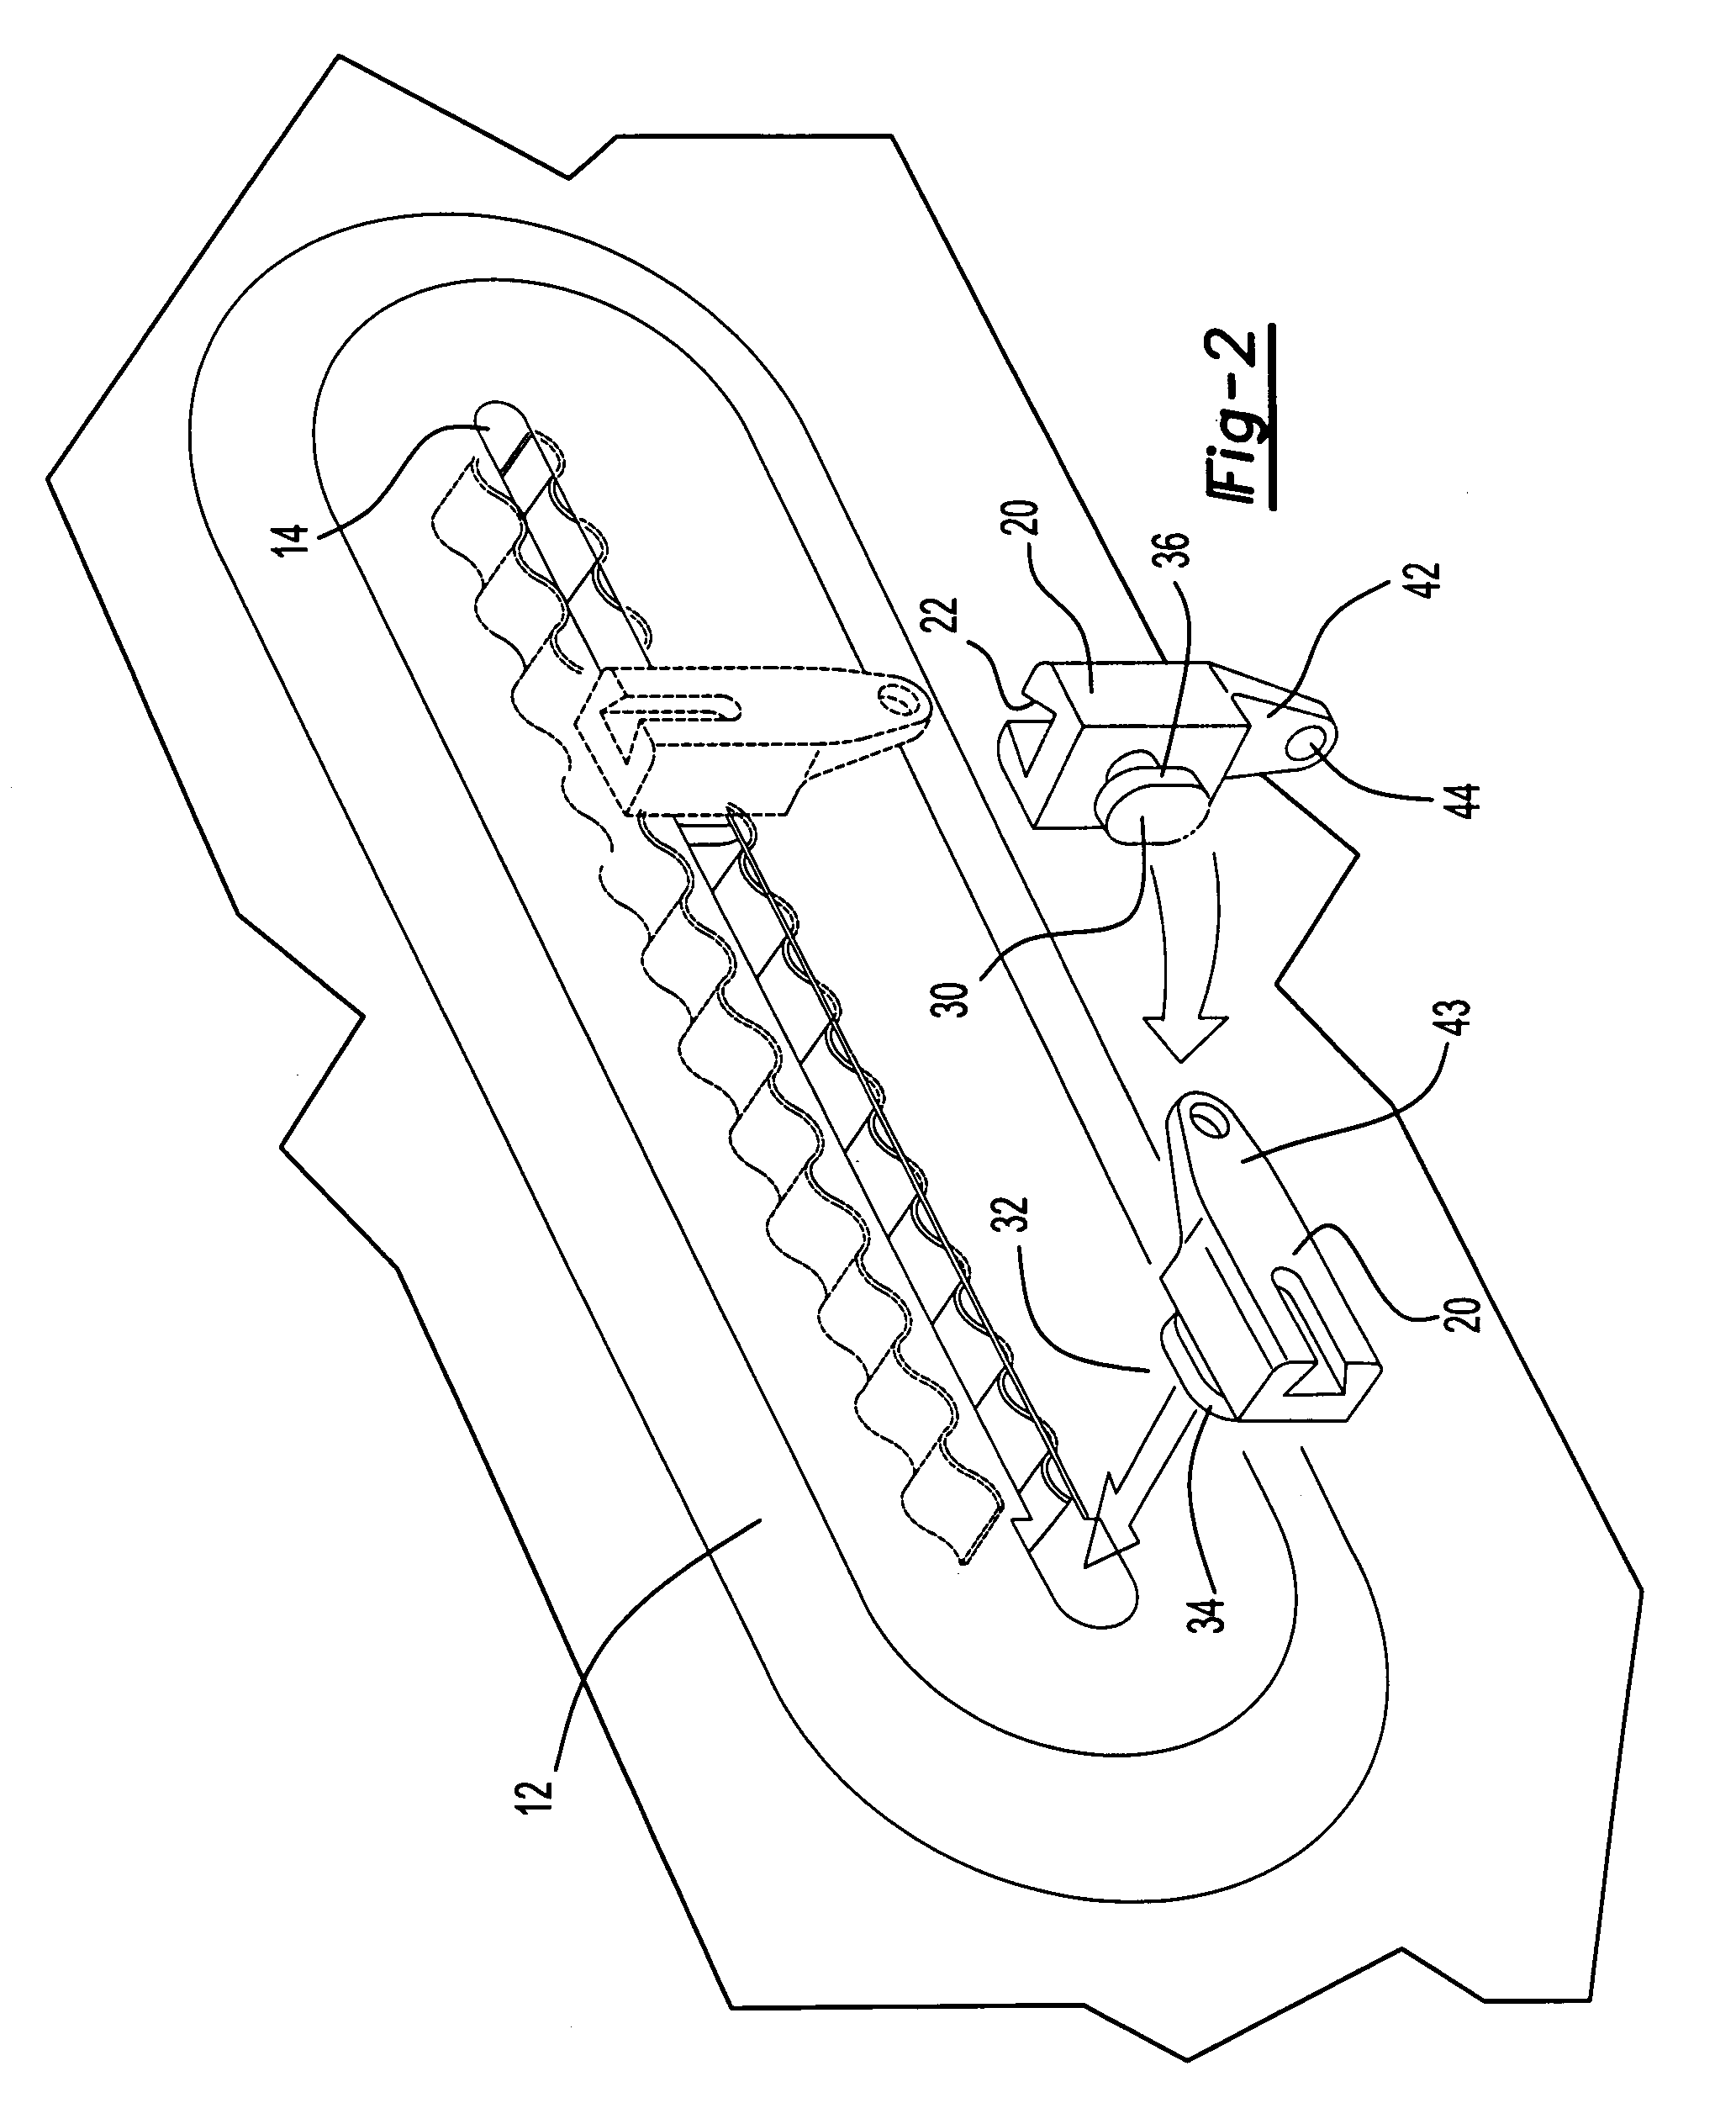 Accessory strip for securing articles within a vehicle interior